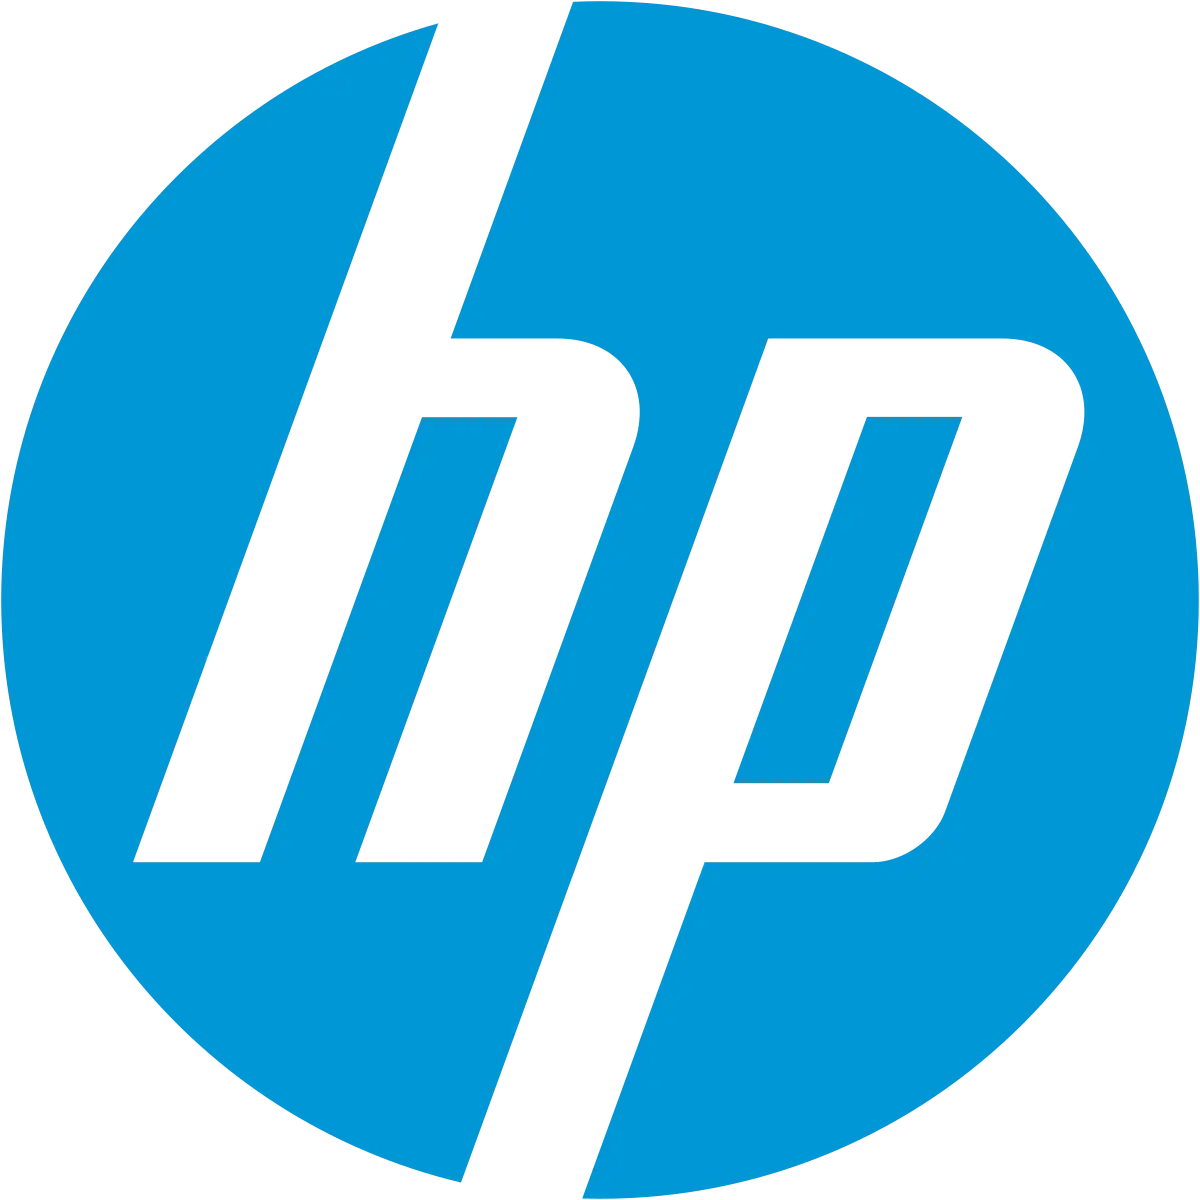 Is hewlett-packard a product based company?